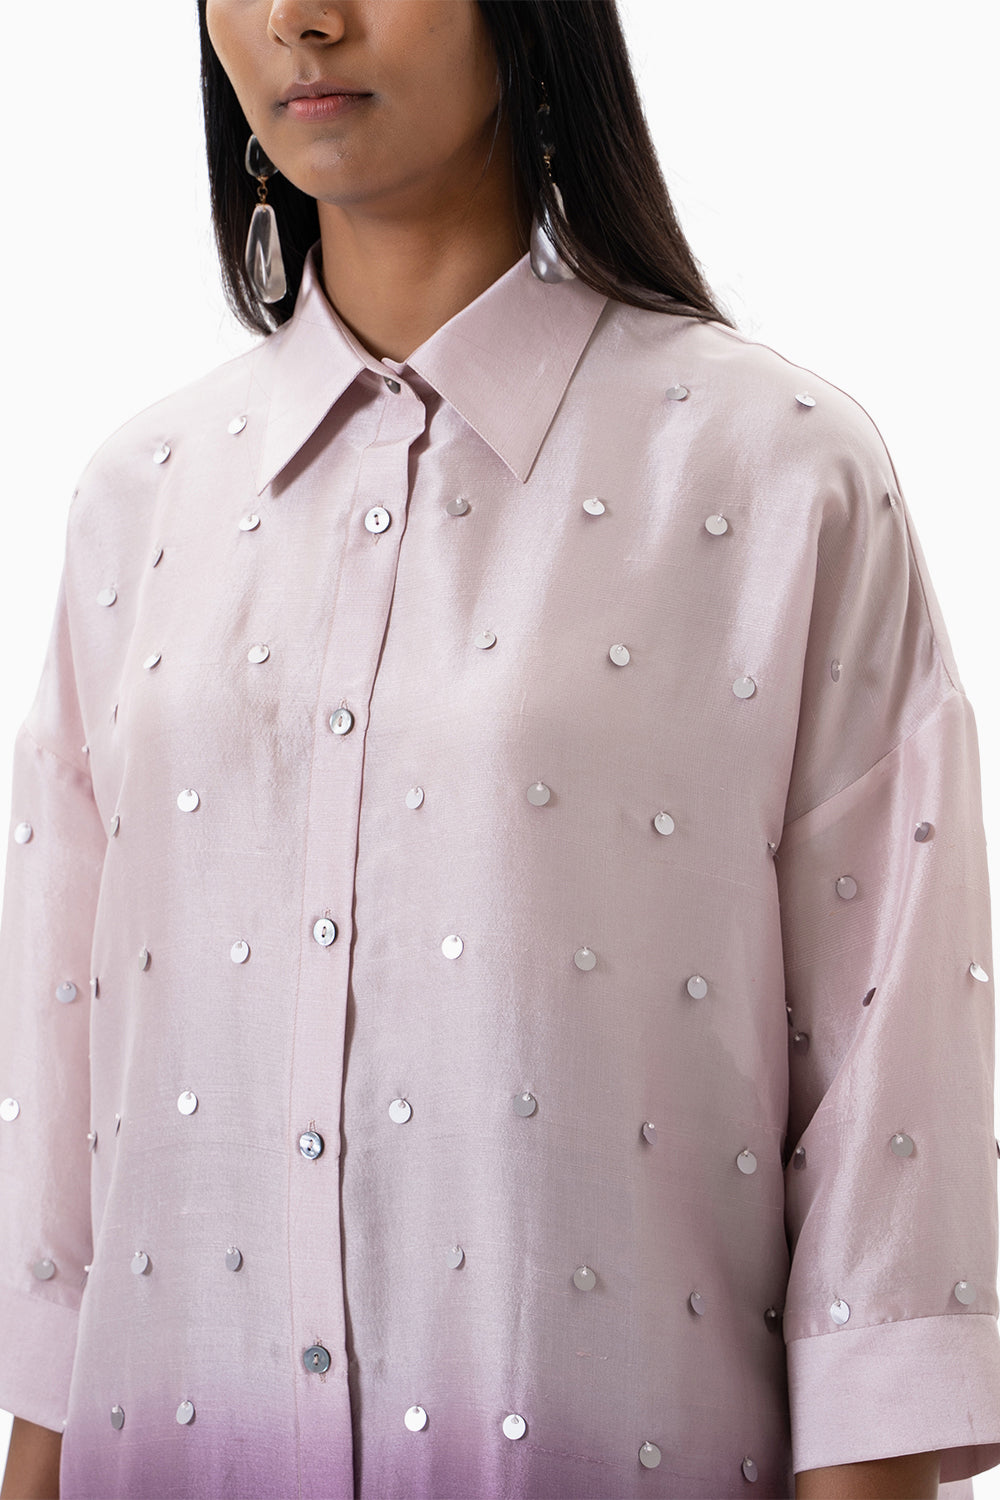 Ombre Lady Bug Shirt